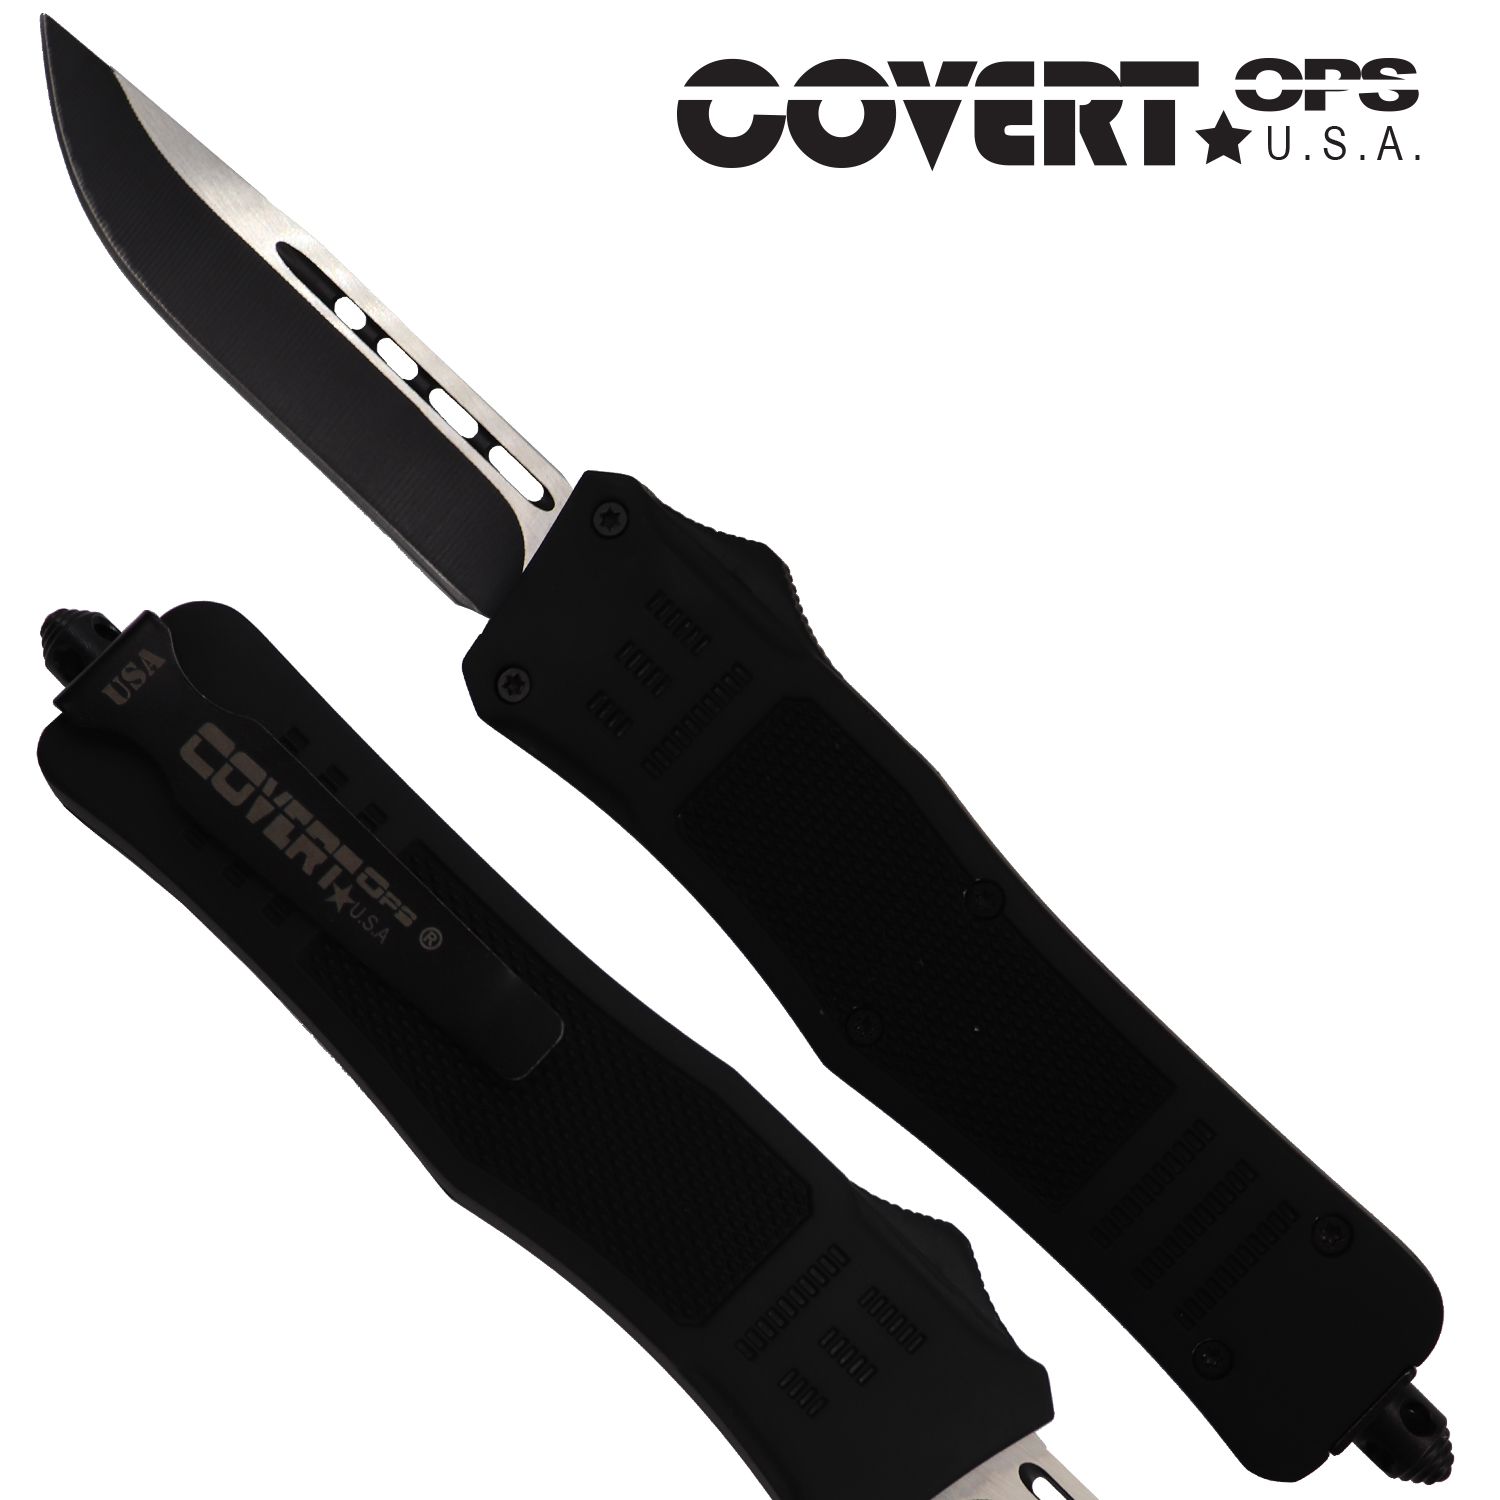 Covert OPS USA OTF Automatic Knife 8 inch overall Black Handle Two Tone Drop Point D2 Steel Blade